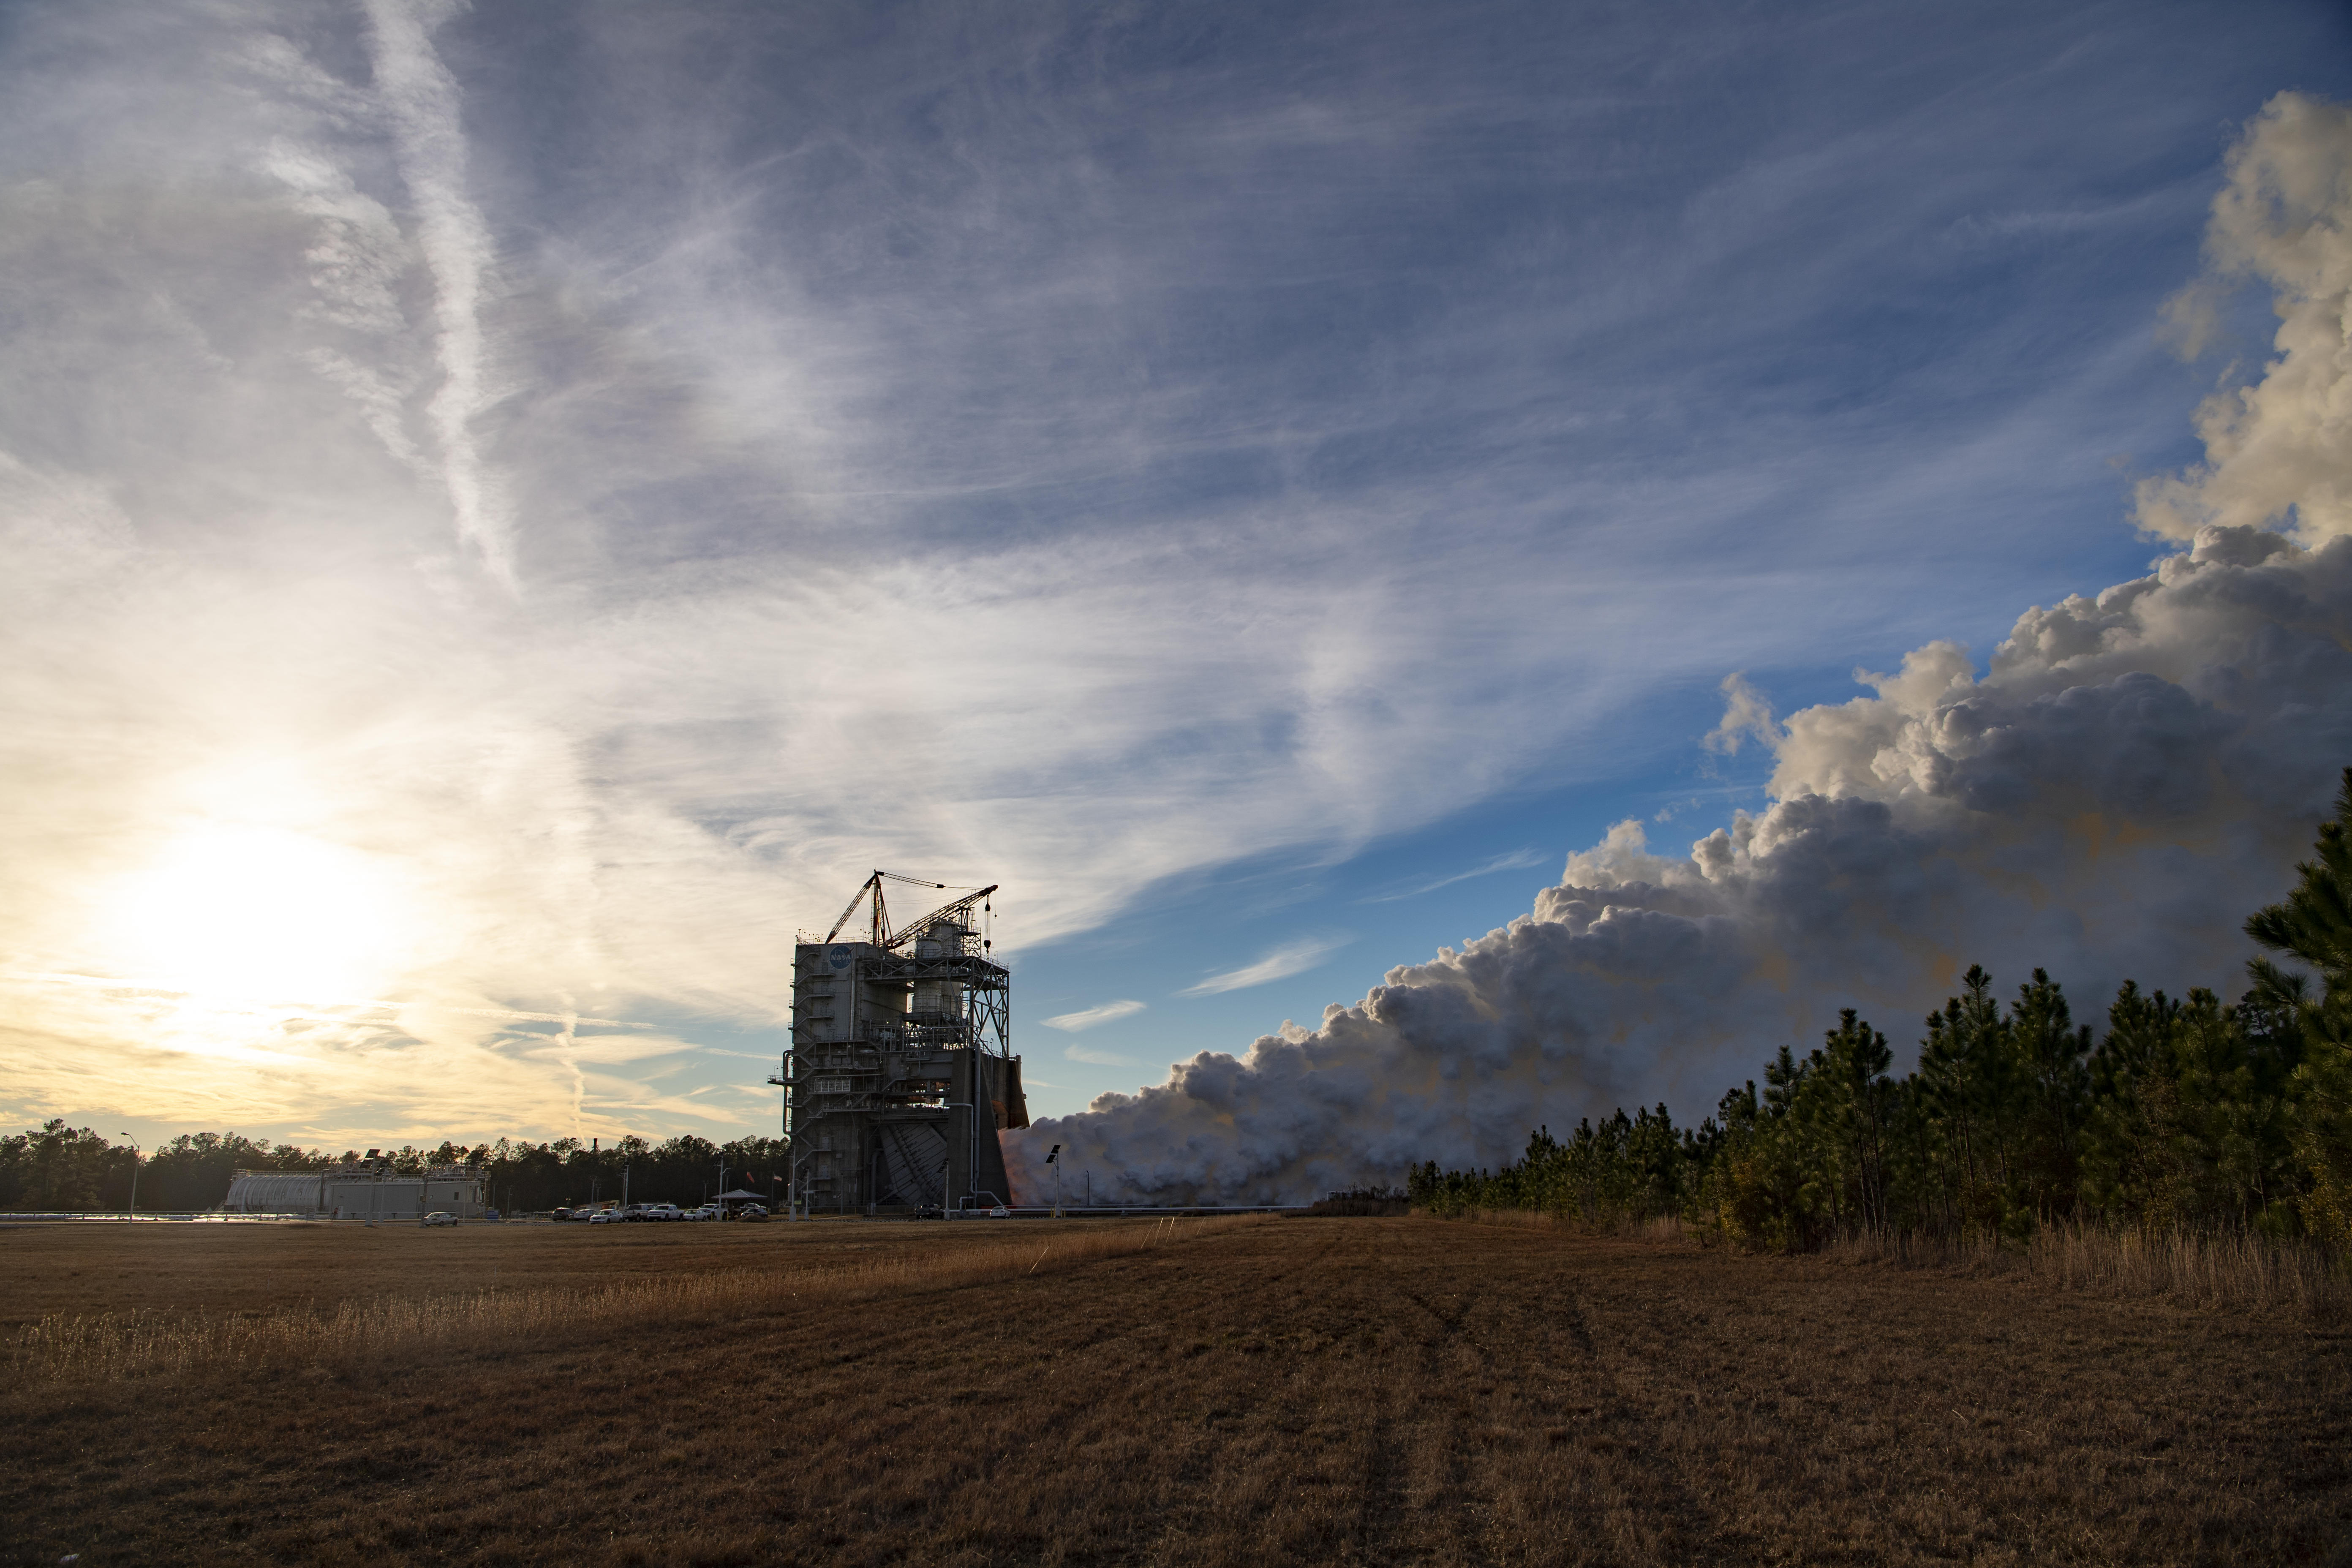 an RS-25 engine test is seen across a grassy field; the sun is visible behind the clouds